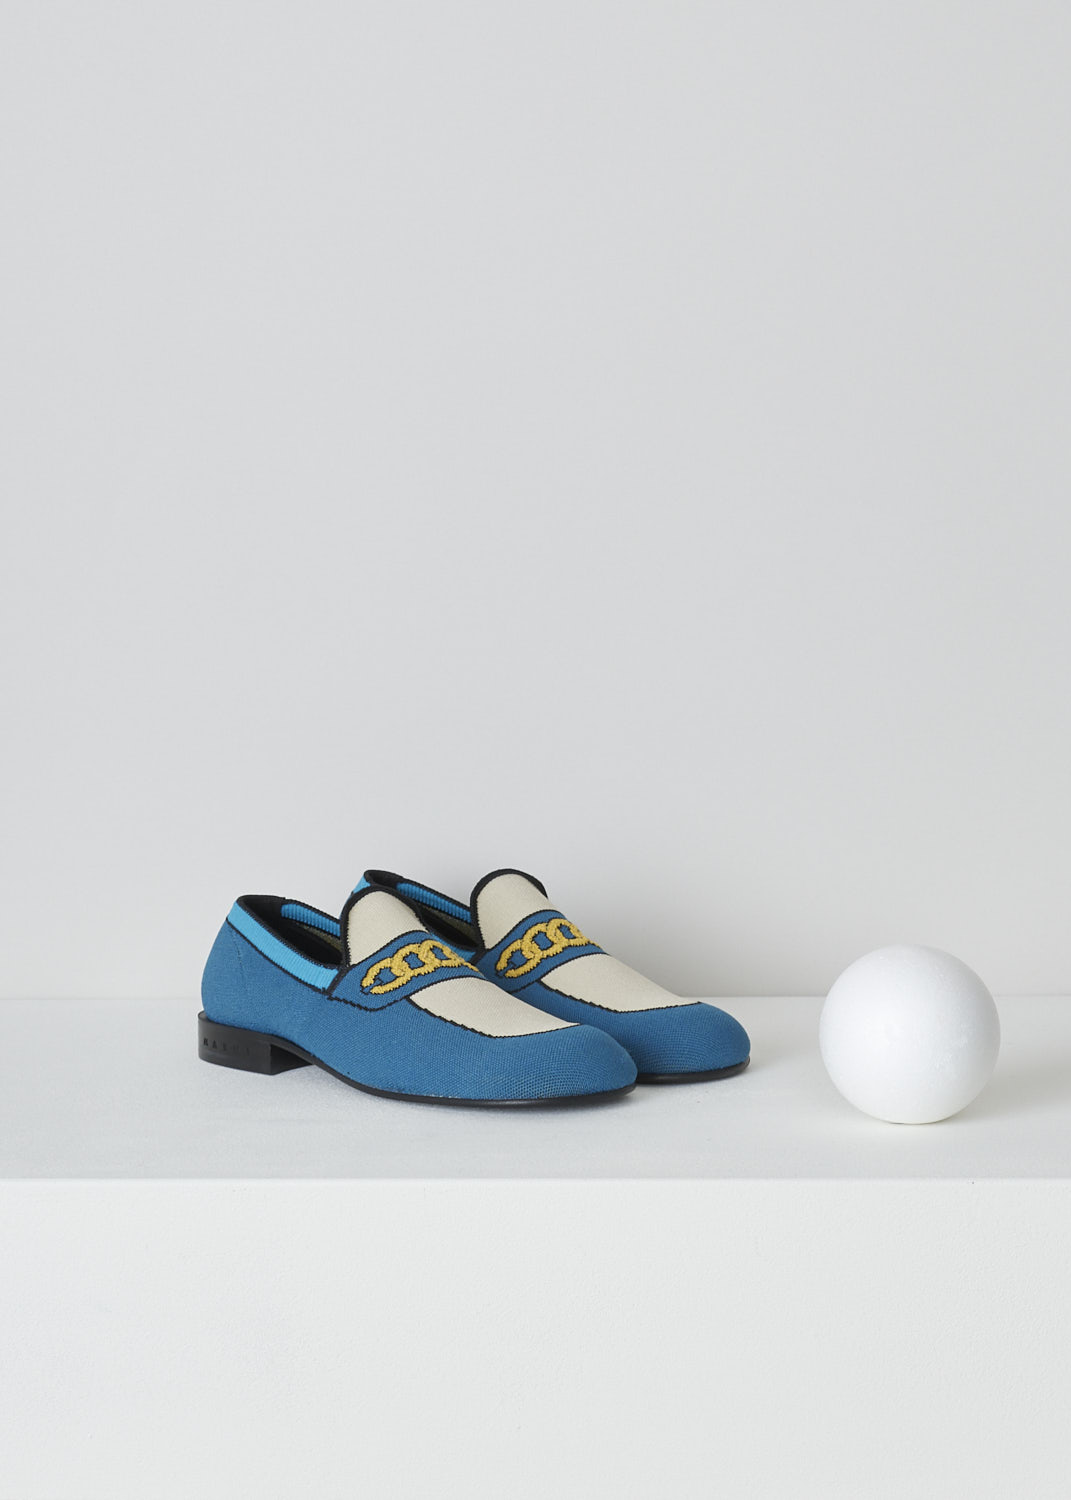 MARNI, BLUE TROMPE L'OEIL JACQUARD MOCASSINS, MOMS003601_P4547_ZO122, Blue, Front, These blue knitted moccasins have a trompe l'oeil image woven into them which depicts the different parts of the shoe and a gold chain across the vamp. These moccasins have a round toe and flat rubber sole with a small heel. 

